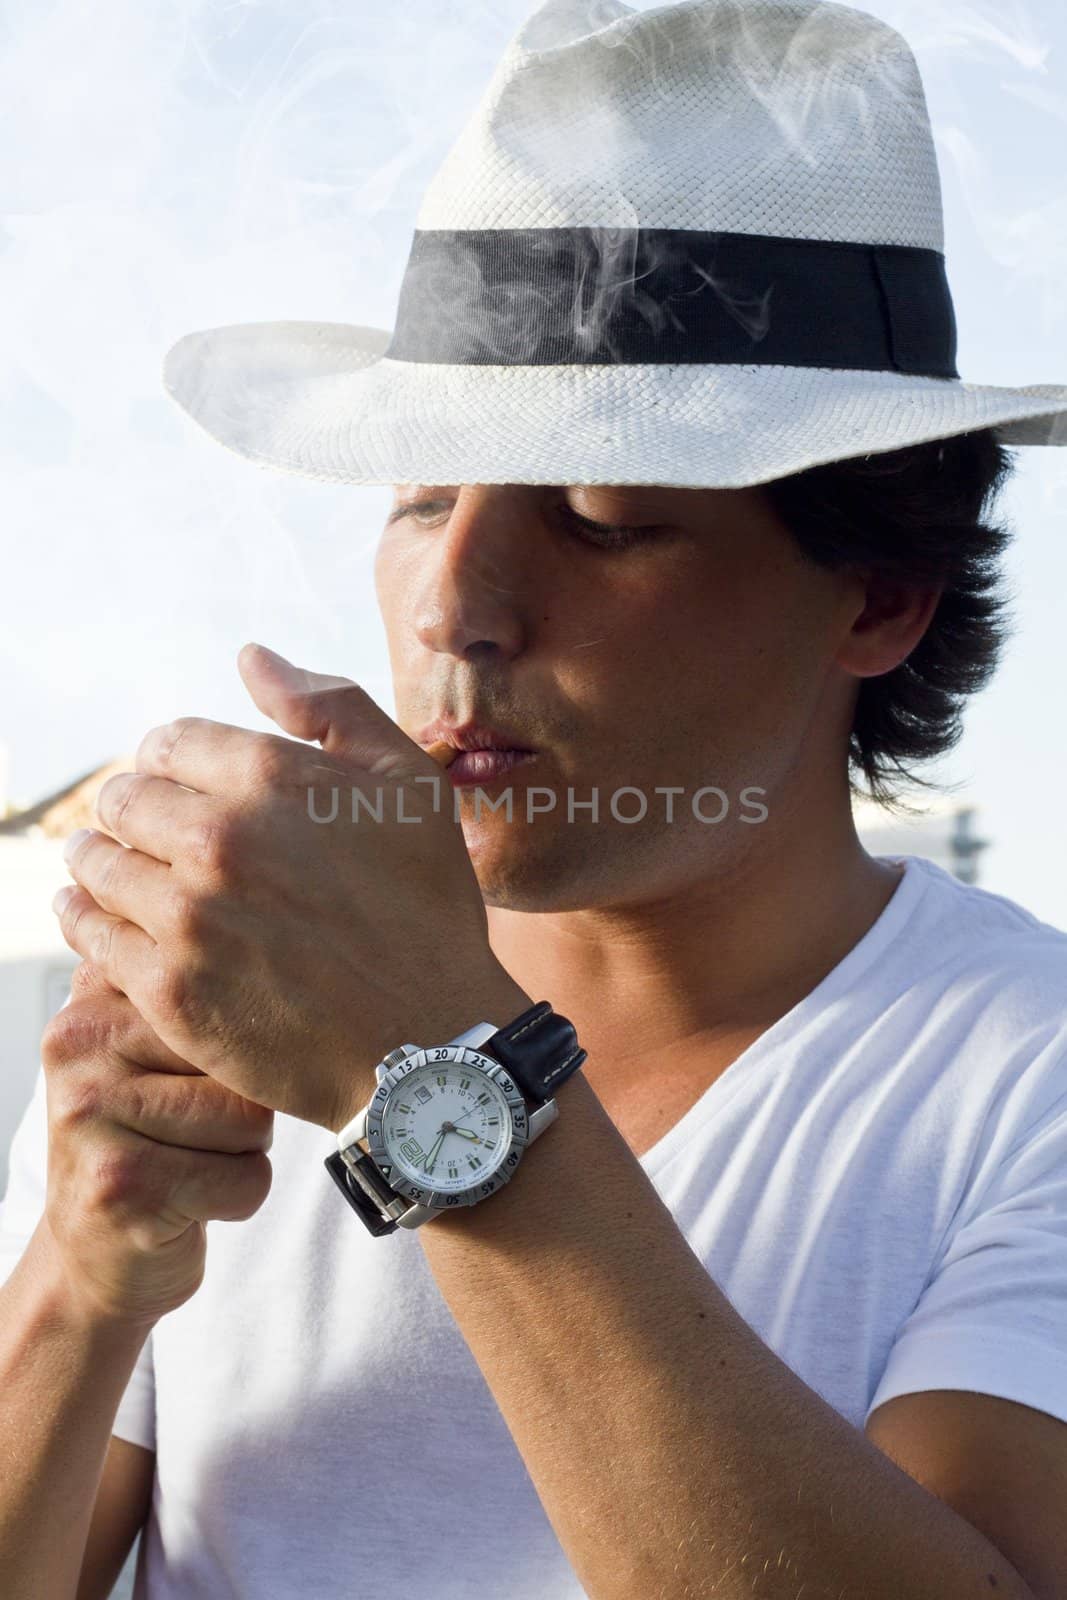 View of a handsome man with white shirt and hat on a urban city lighting a cigarette.